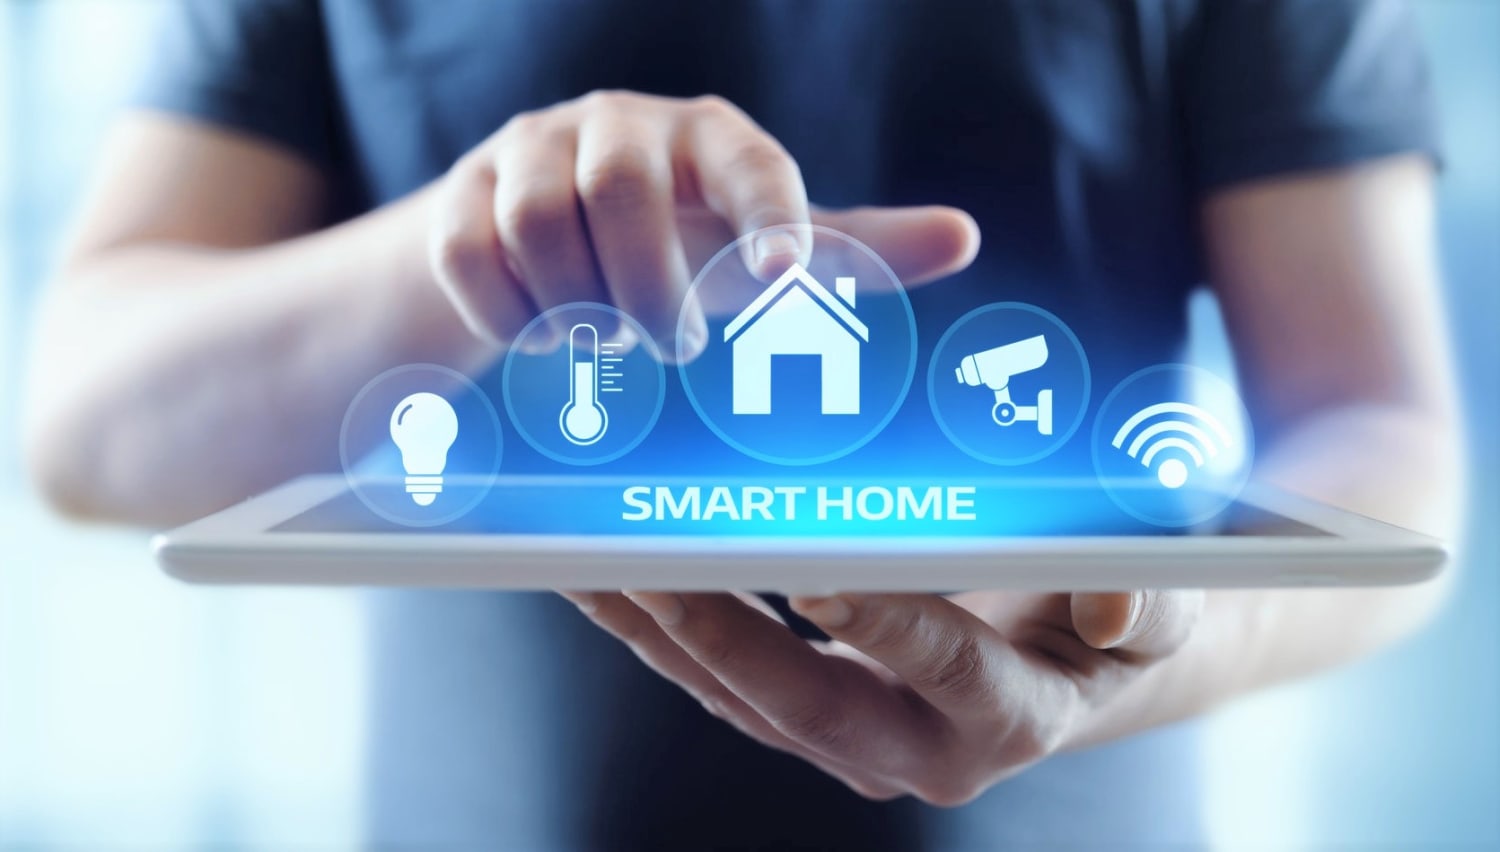 Best Smart Home Devices in 2020